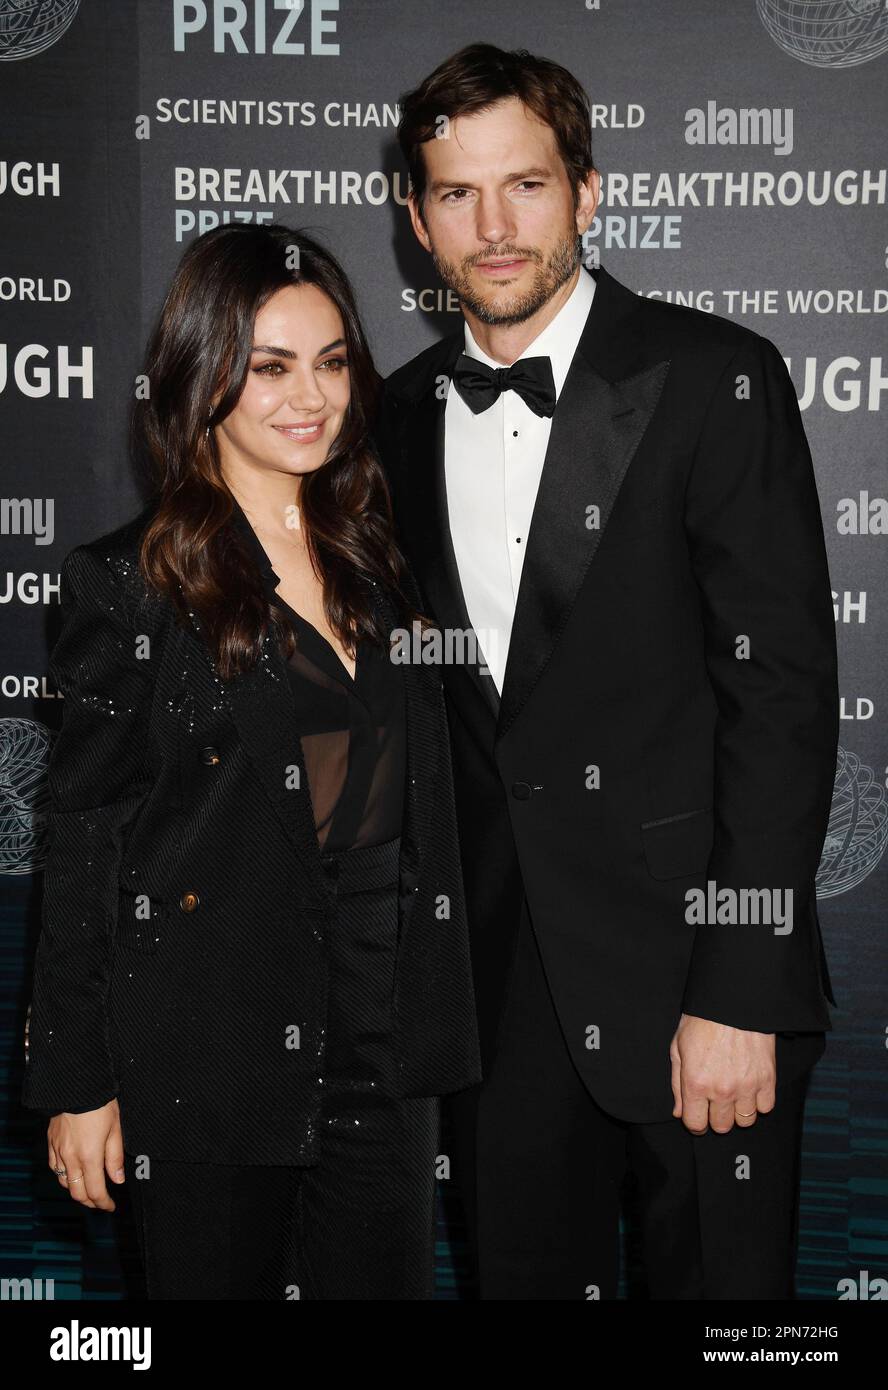 Los Angeles, California, USA. 15th Apr, 2023. (L-R) Mila Kunis and Ashton Kutcher attend the Ninth Breakthrough Prize Ceremony at Academy Museum of Motion Pictures on April 15, 2023 in Los Angeles, California. Credit: Jeffrey Mayer/Jtm Photos,/Media Punch/Alamy Live News Stock Photo